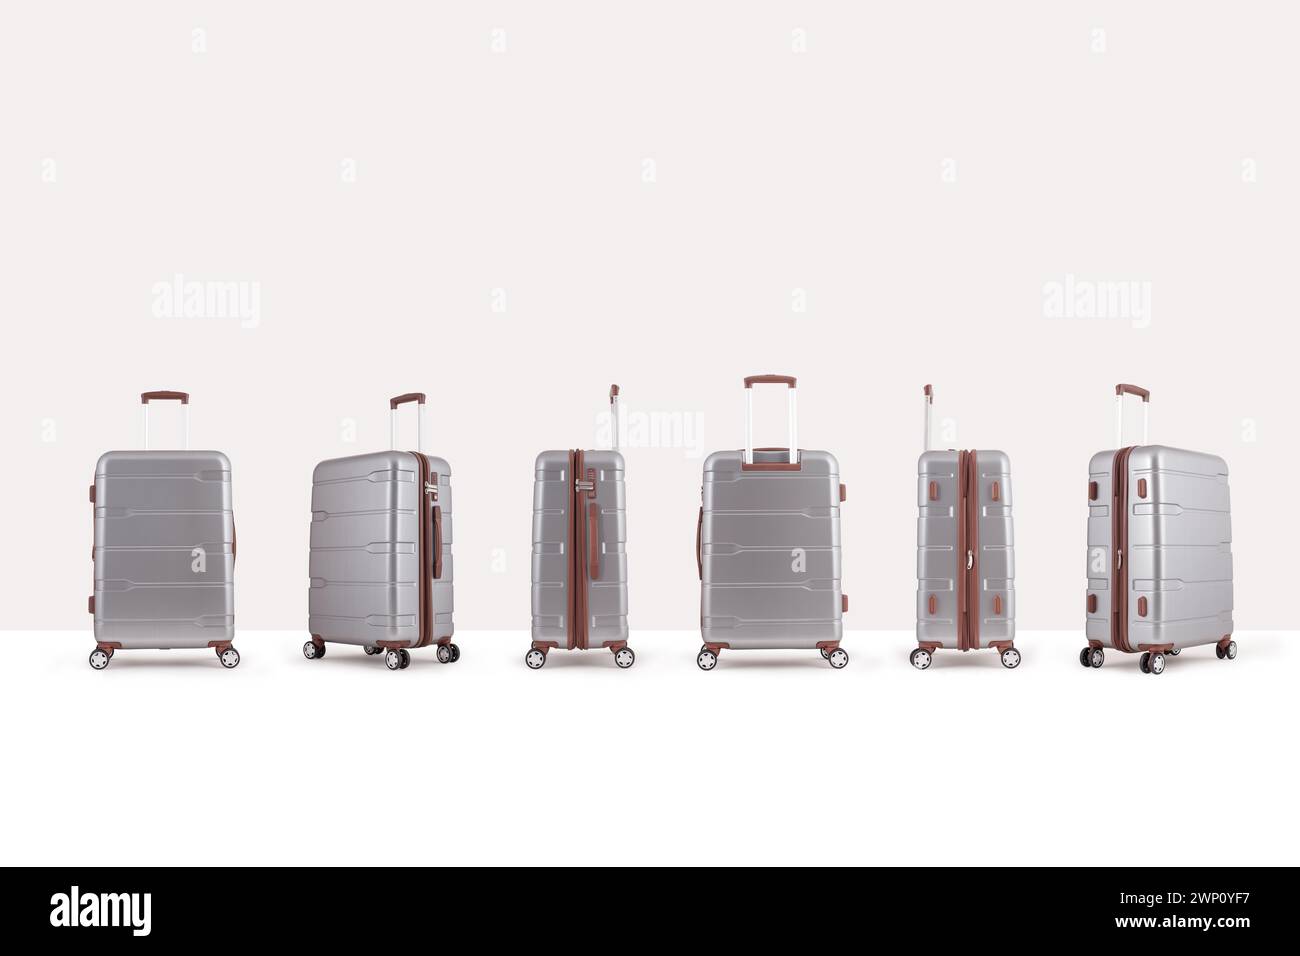 Gray plastic suitcase isolated on white background, group of vacation luggage in perspective view Stock Photo